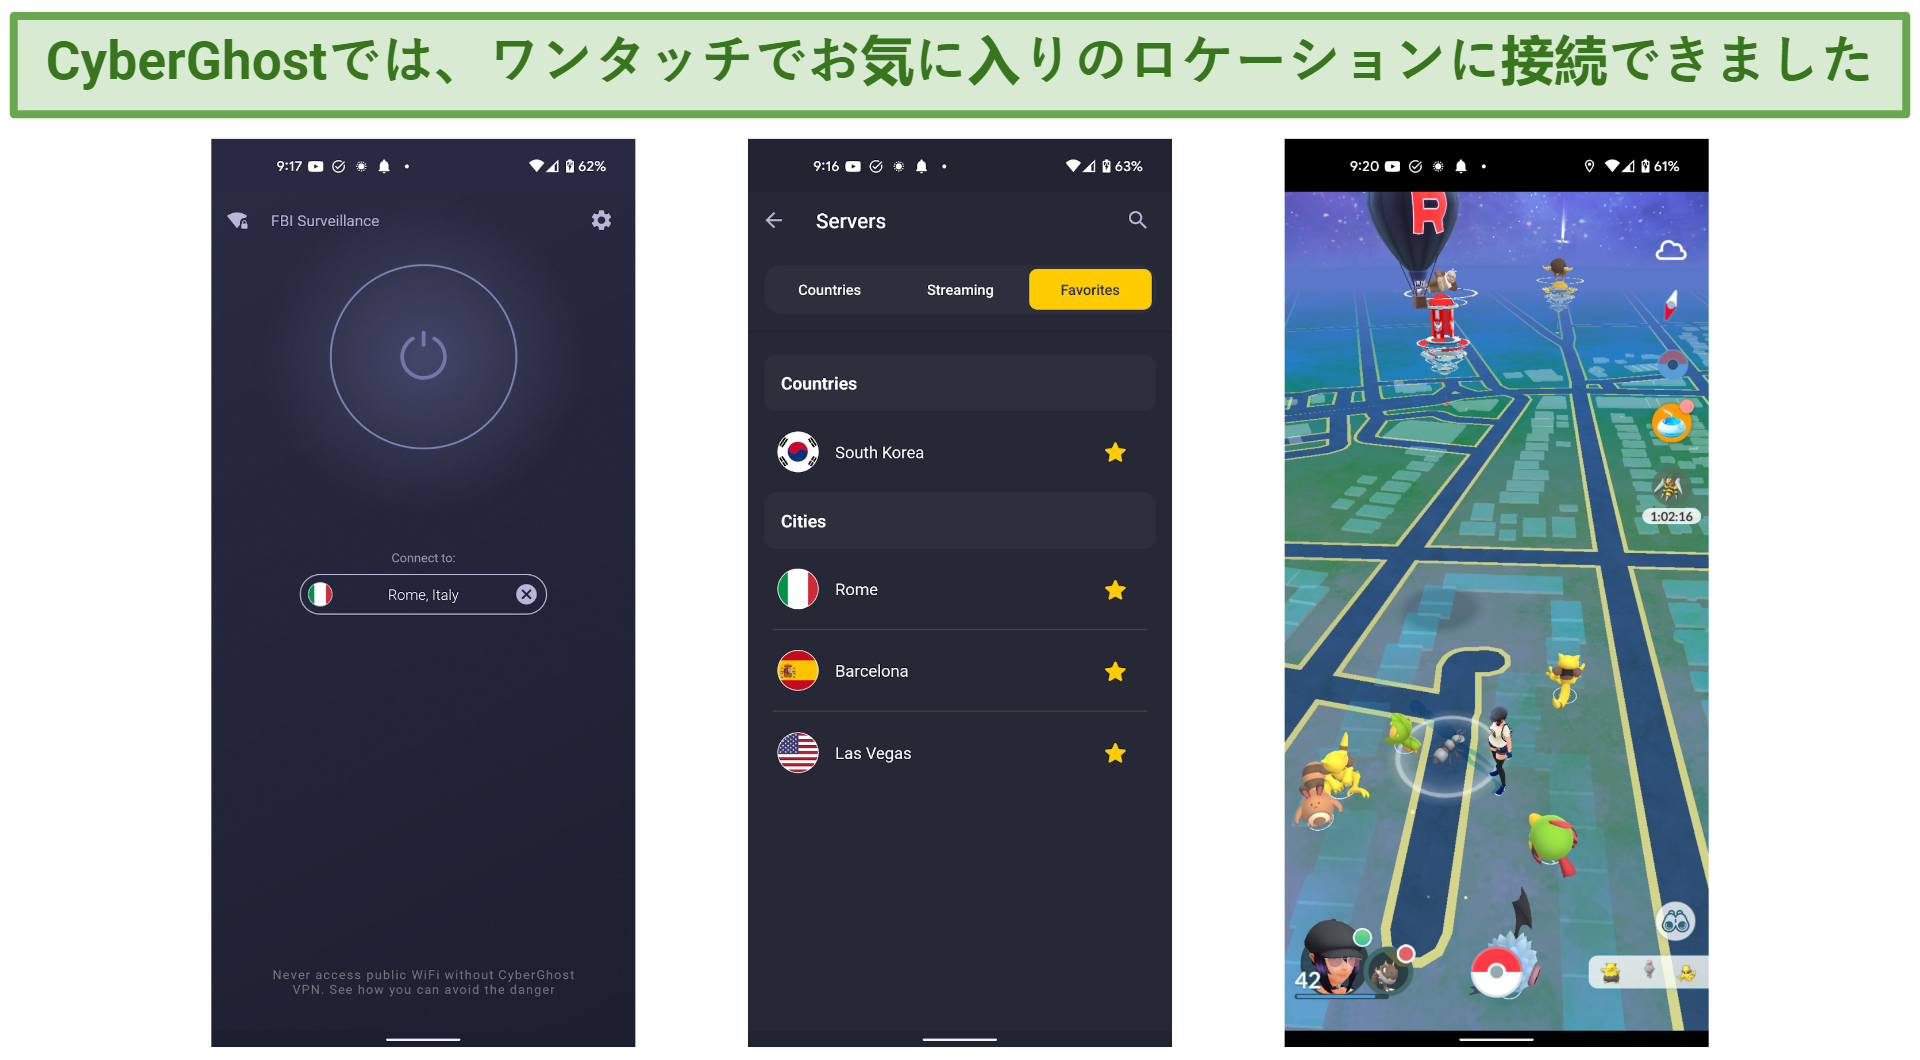 Screenshots showing an Android with the CyberGhost app and the Favorite locations screen, and playing Pokémon GO